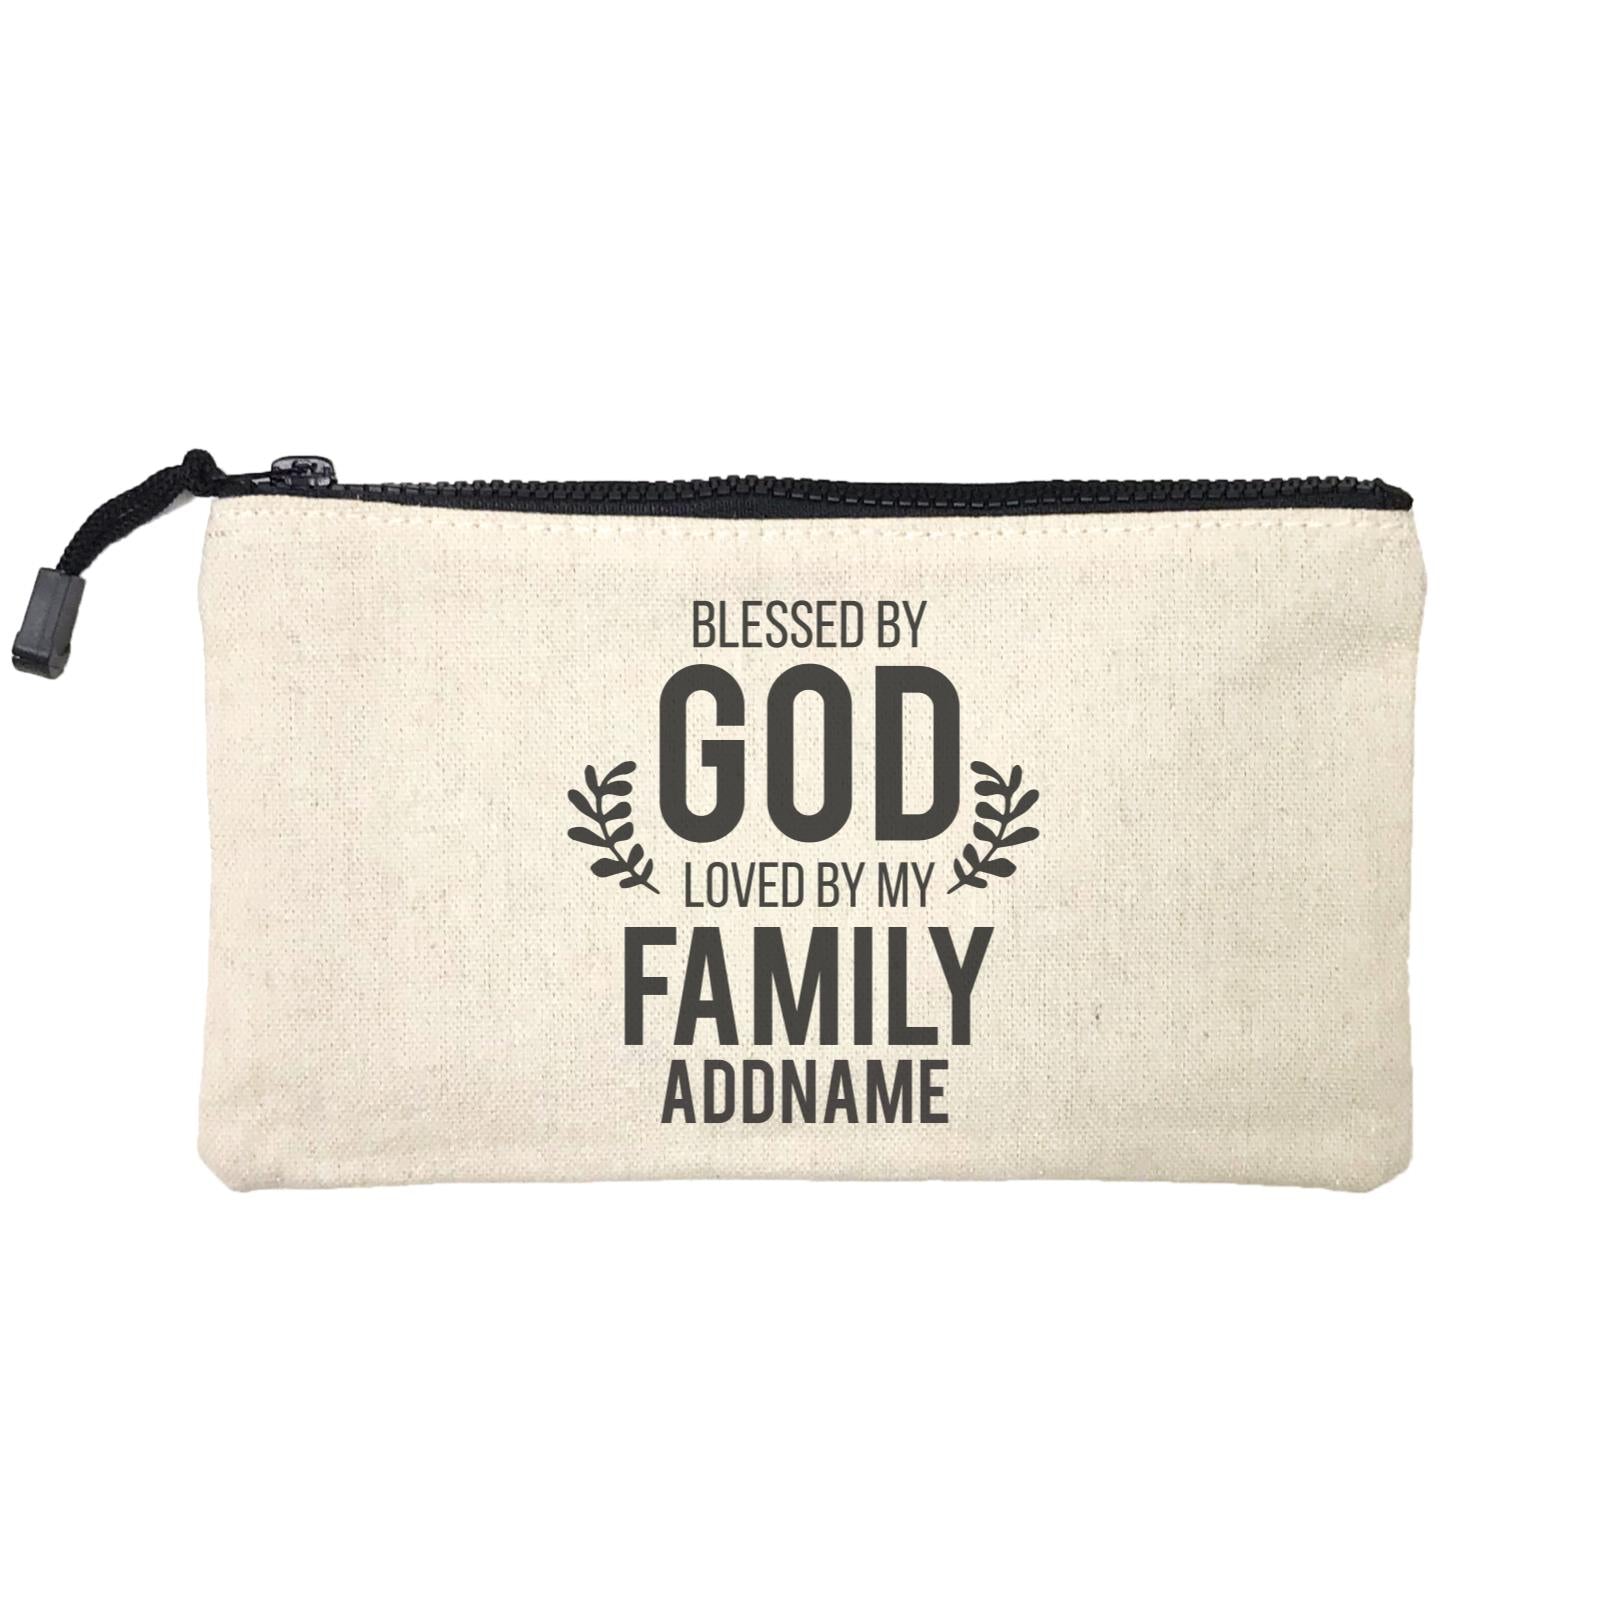 Christian Series Blessed By God Love By My Family Addname Mini Accessories Stationery Pouch